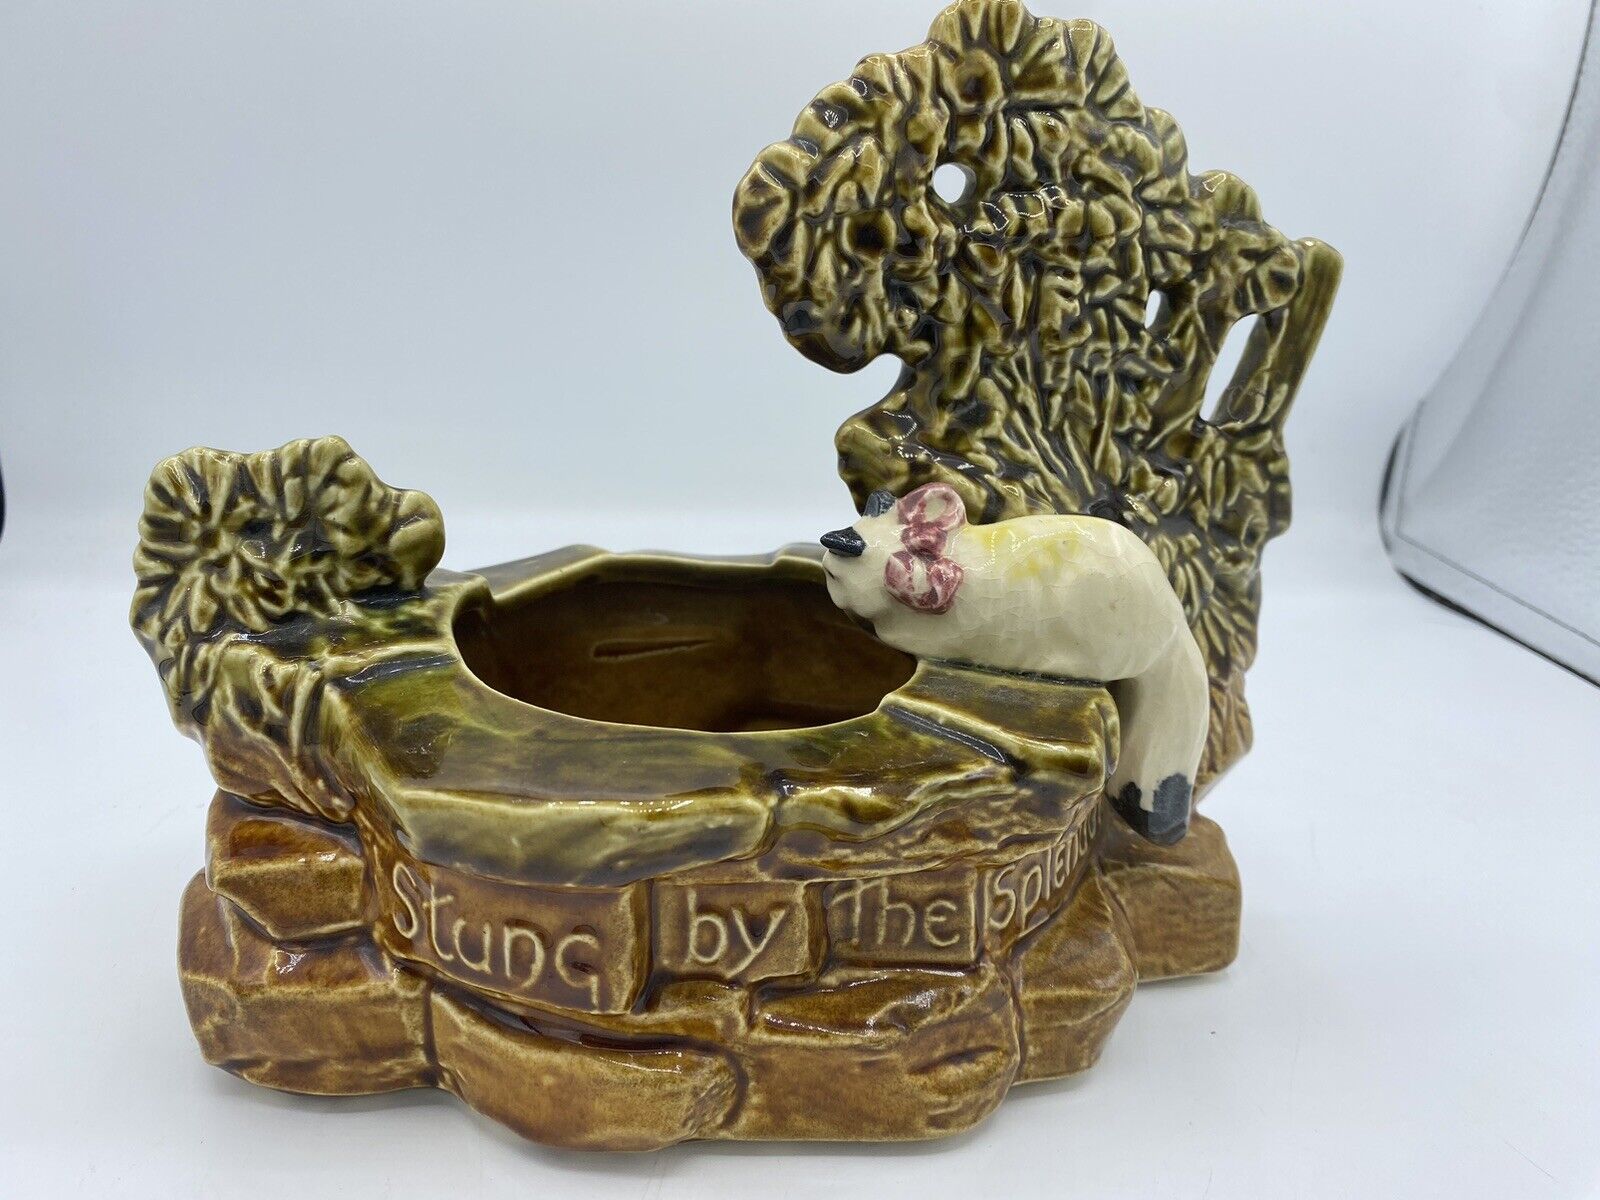 Rare 1957 McCoy Cat Planter “Stung By The Splendor Of A Sudden Thought\